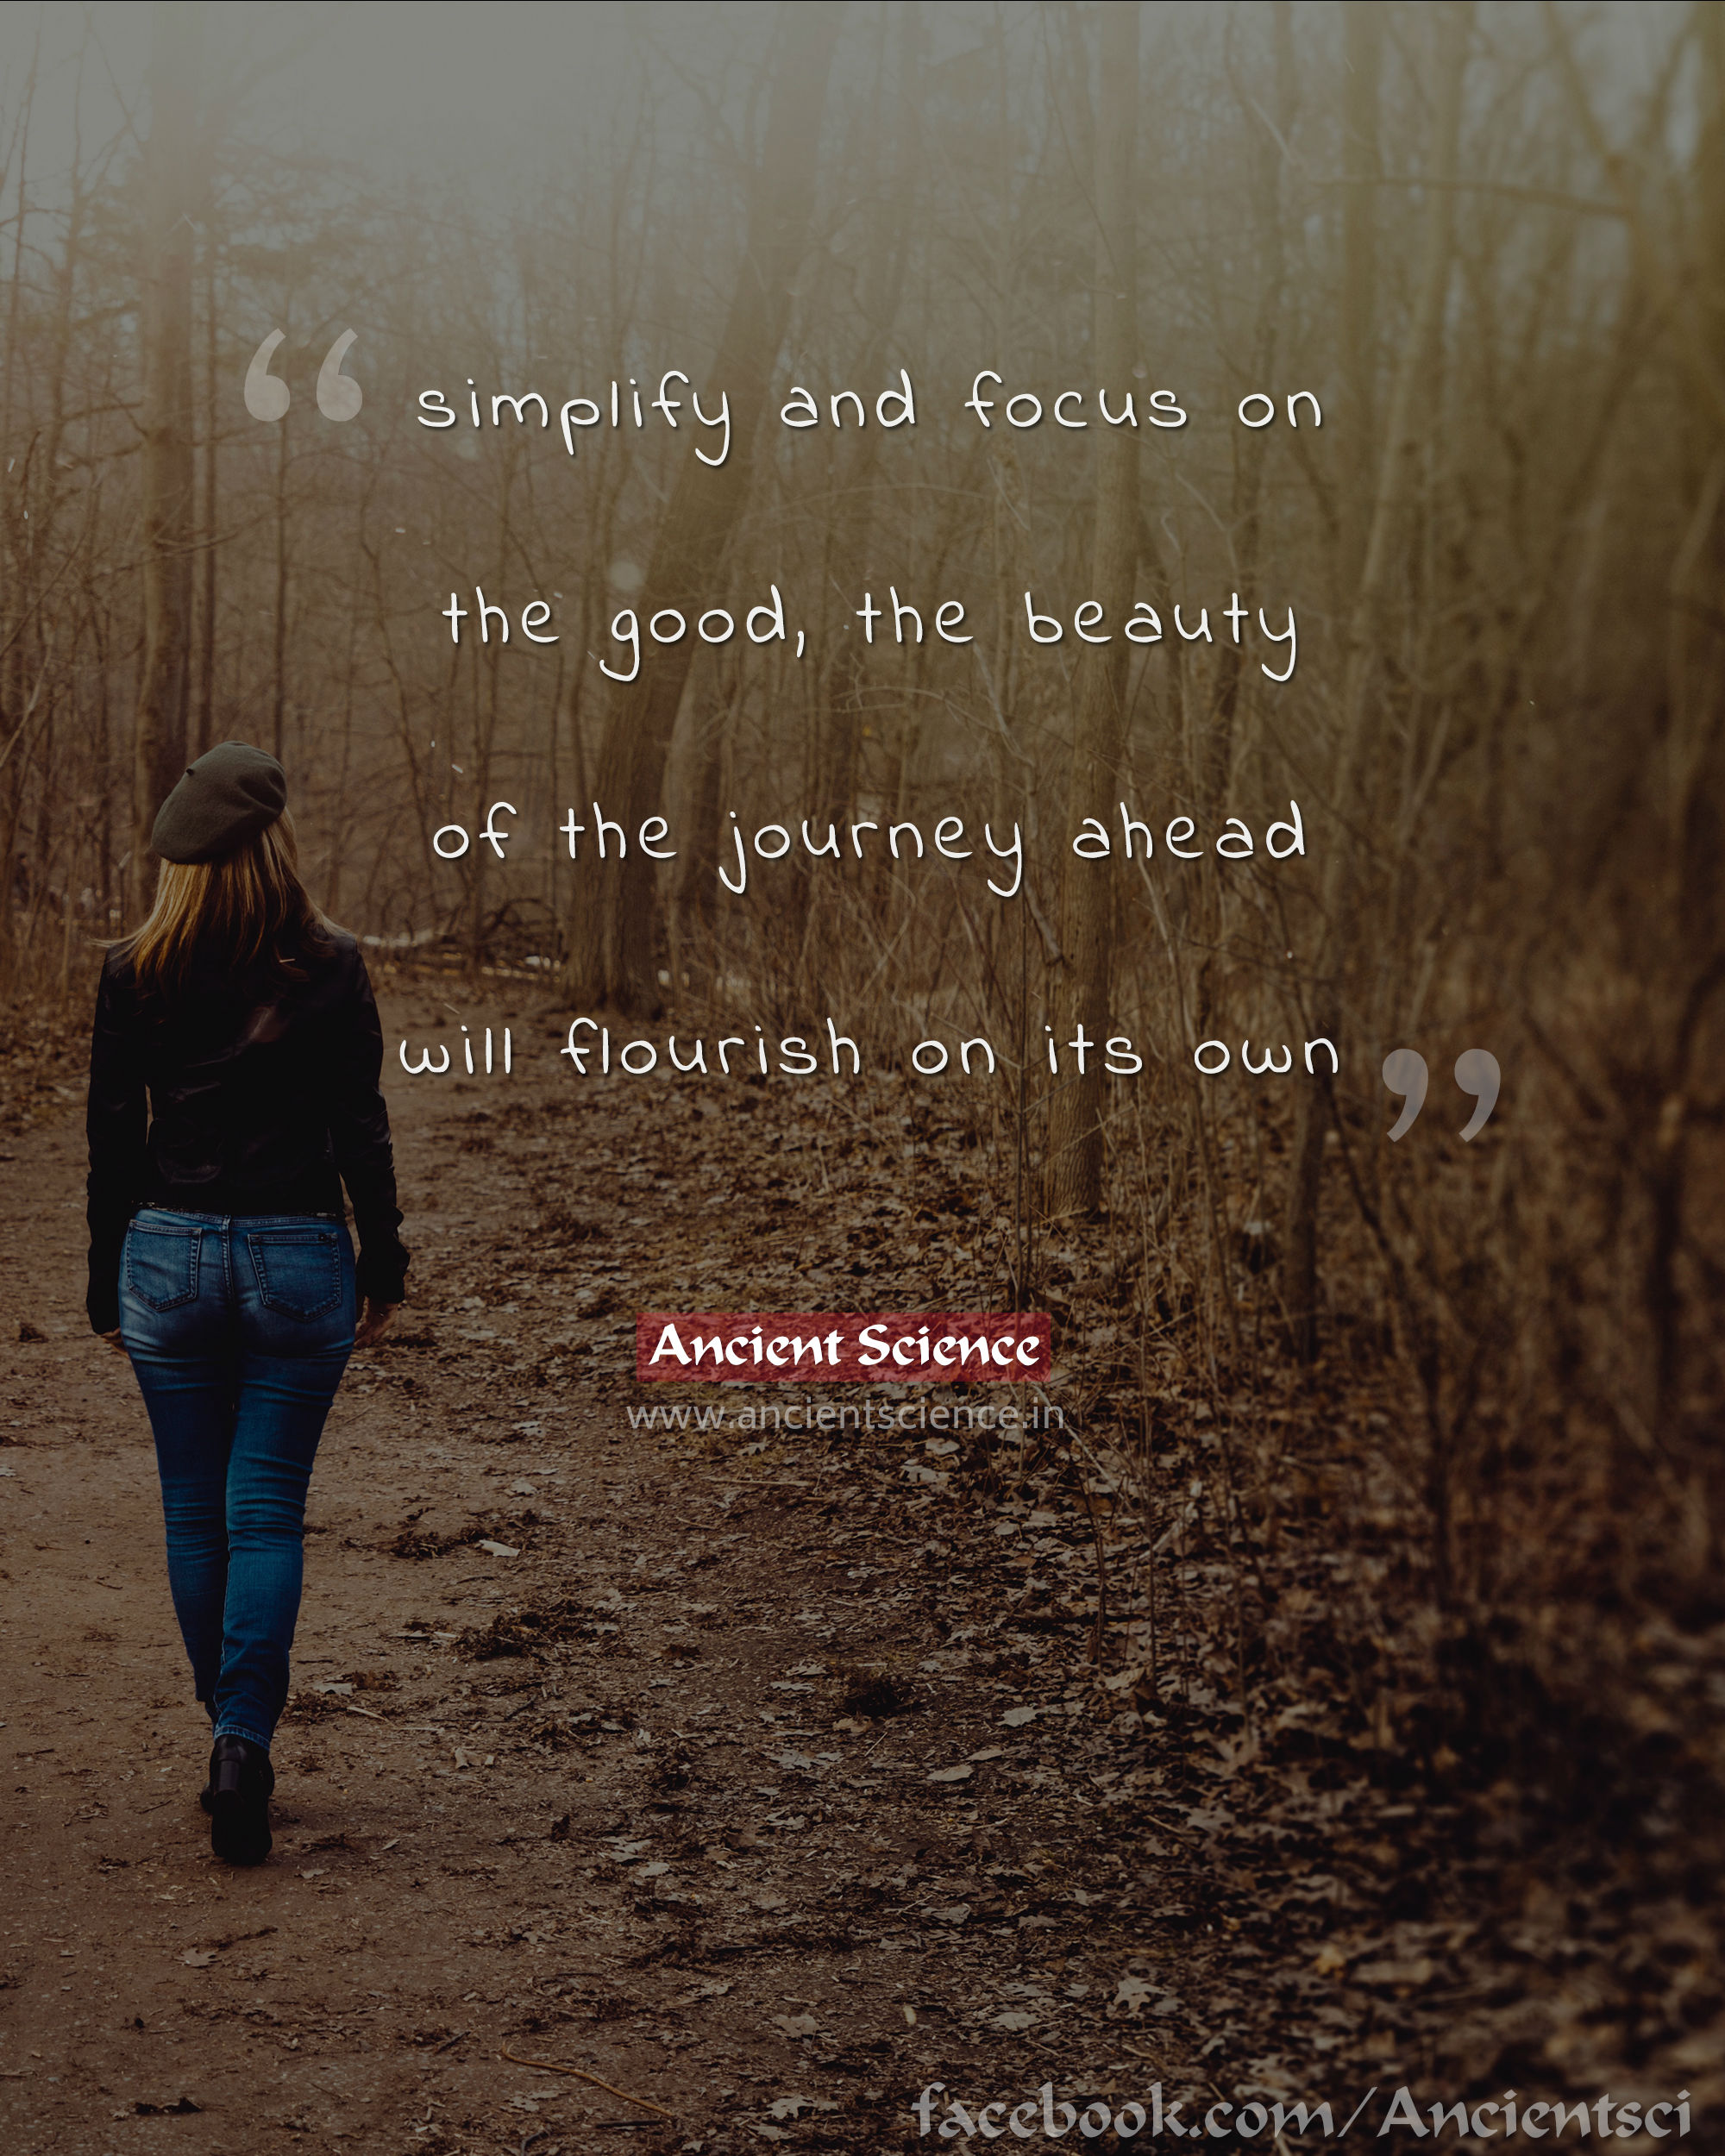 Simplify and focus on the good.